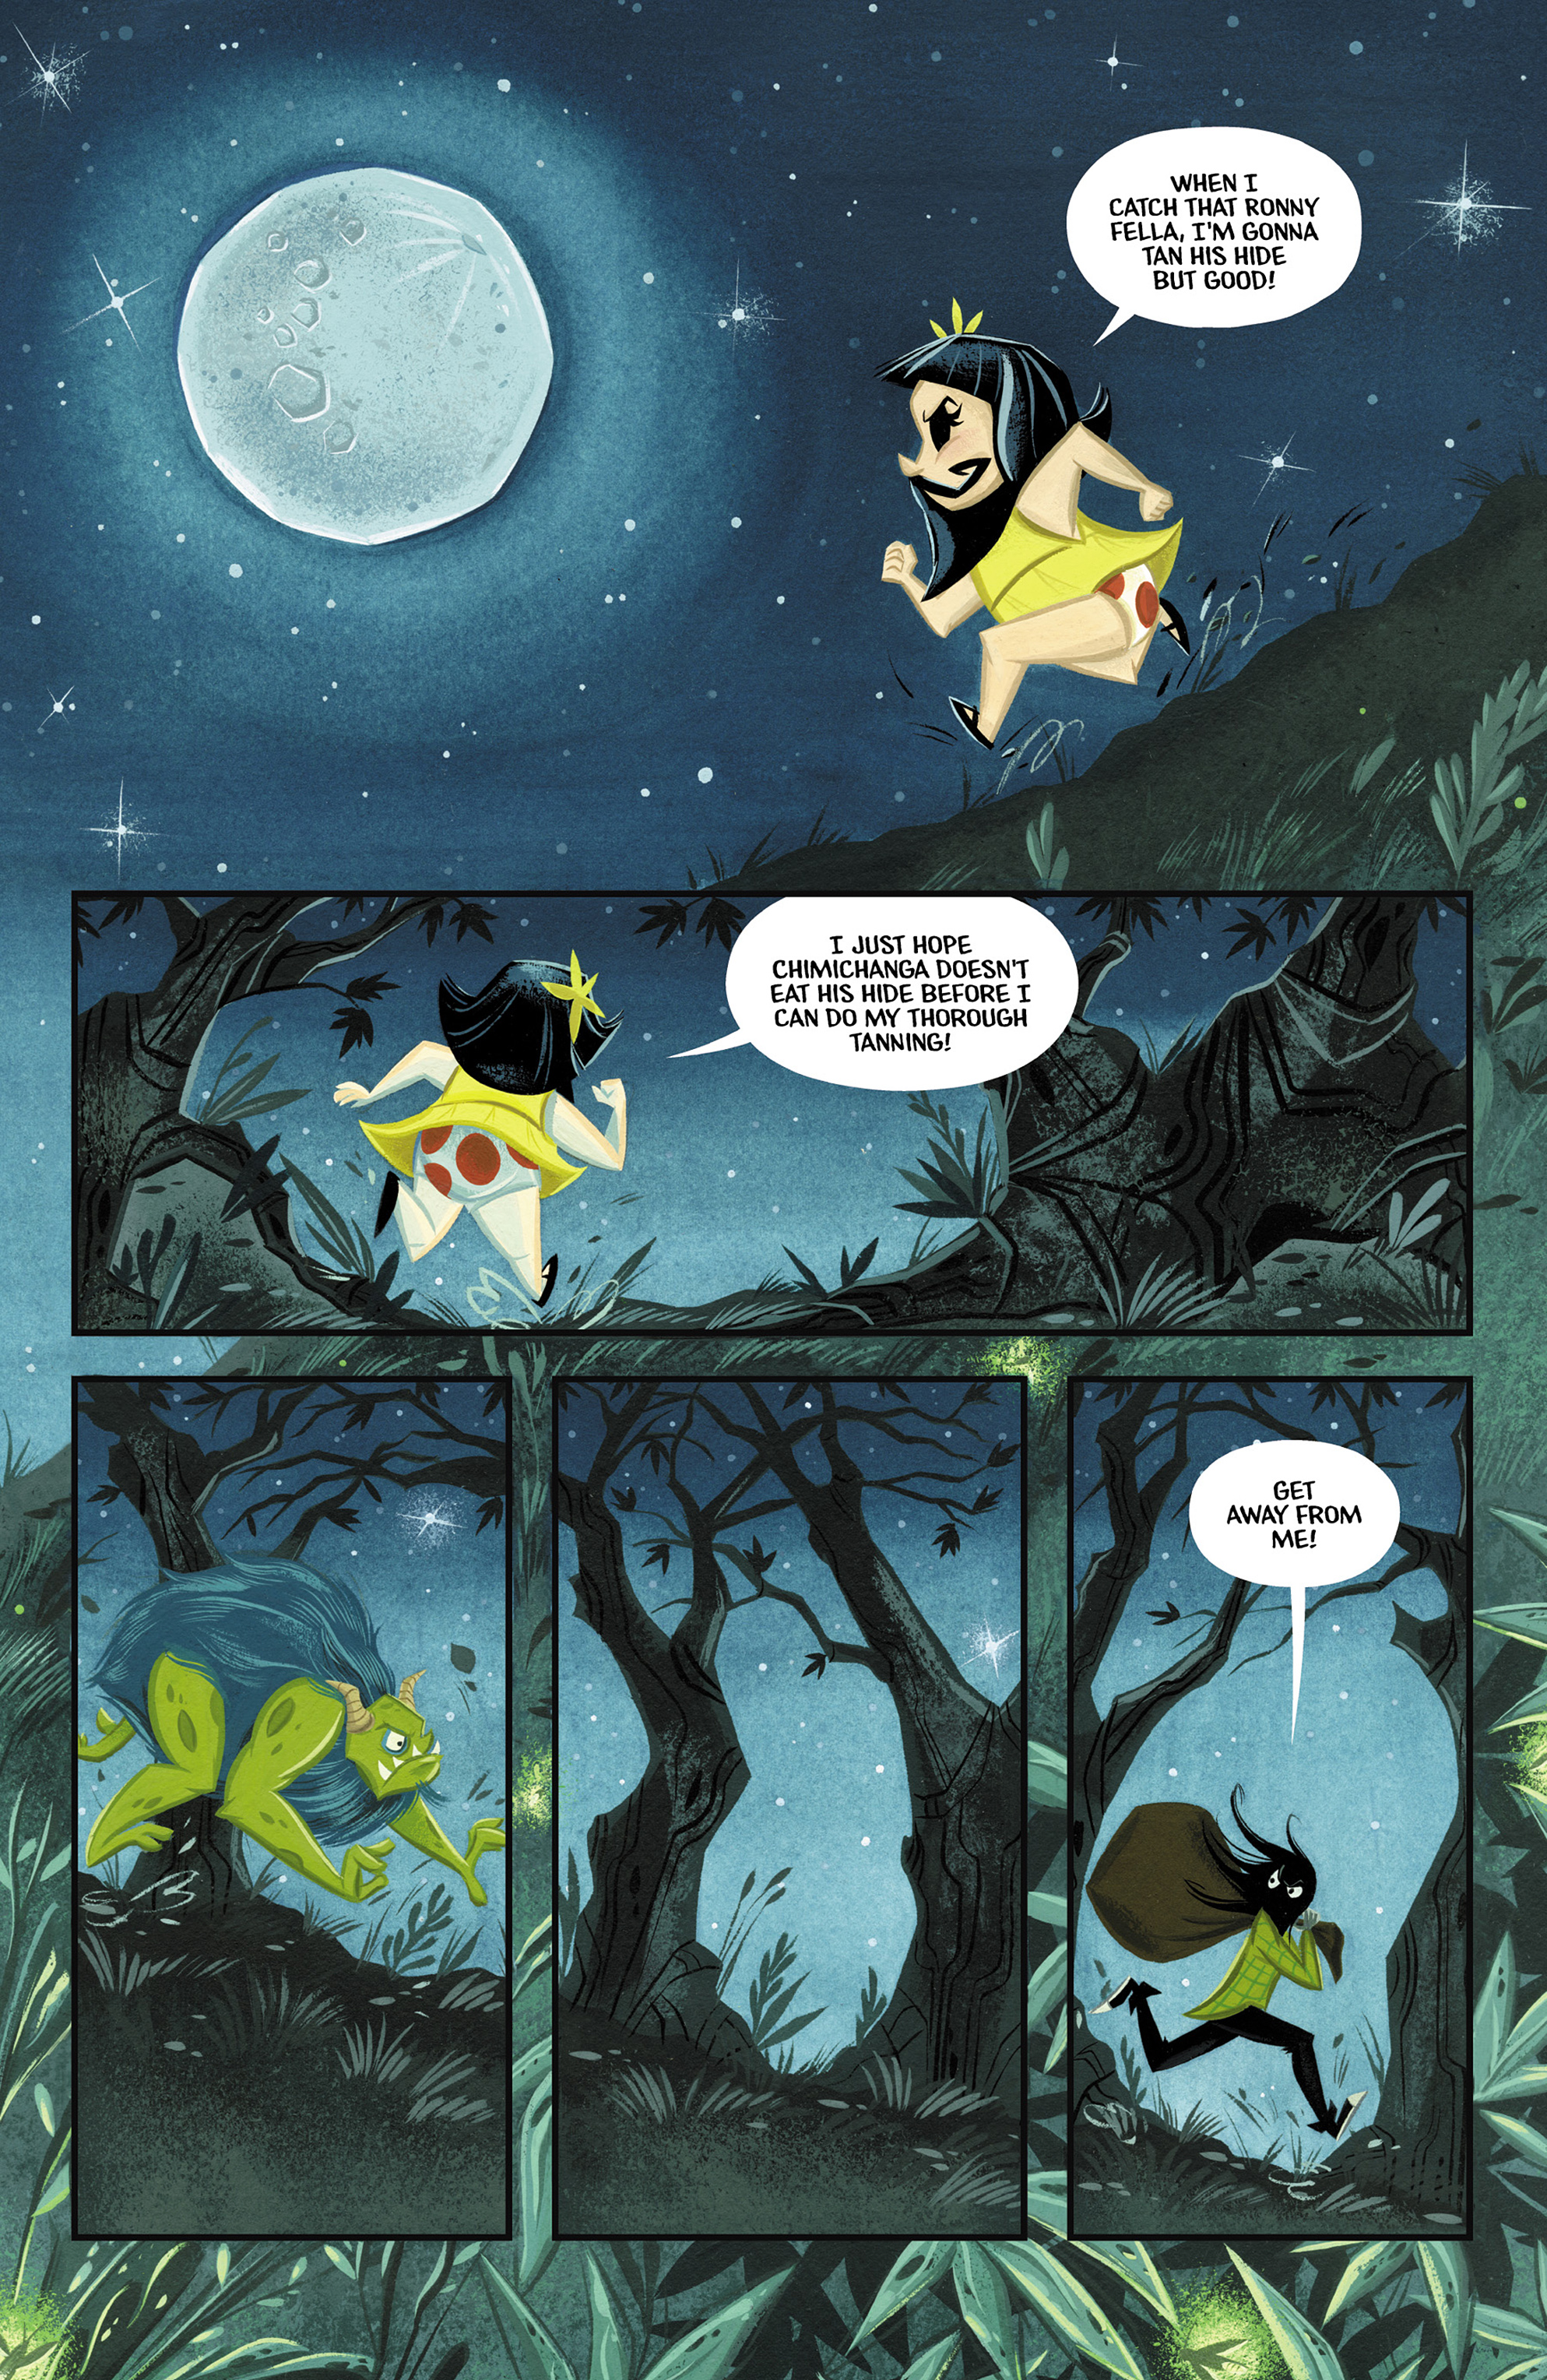 Chimichanga - The Sorrow of the World's Worst Face!: Chapter 2 - Page 3